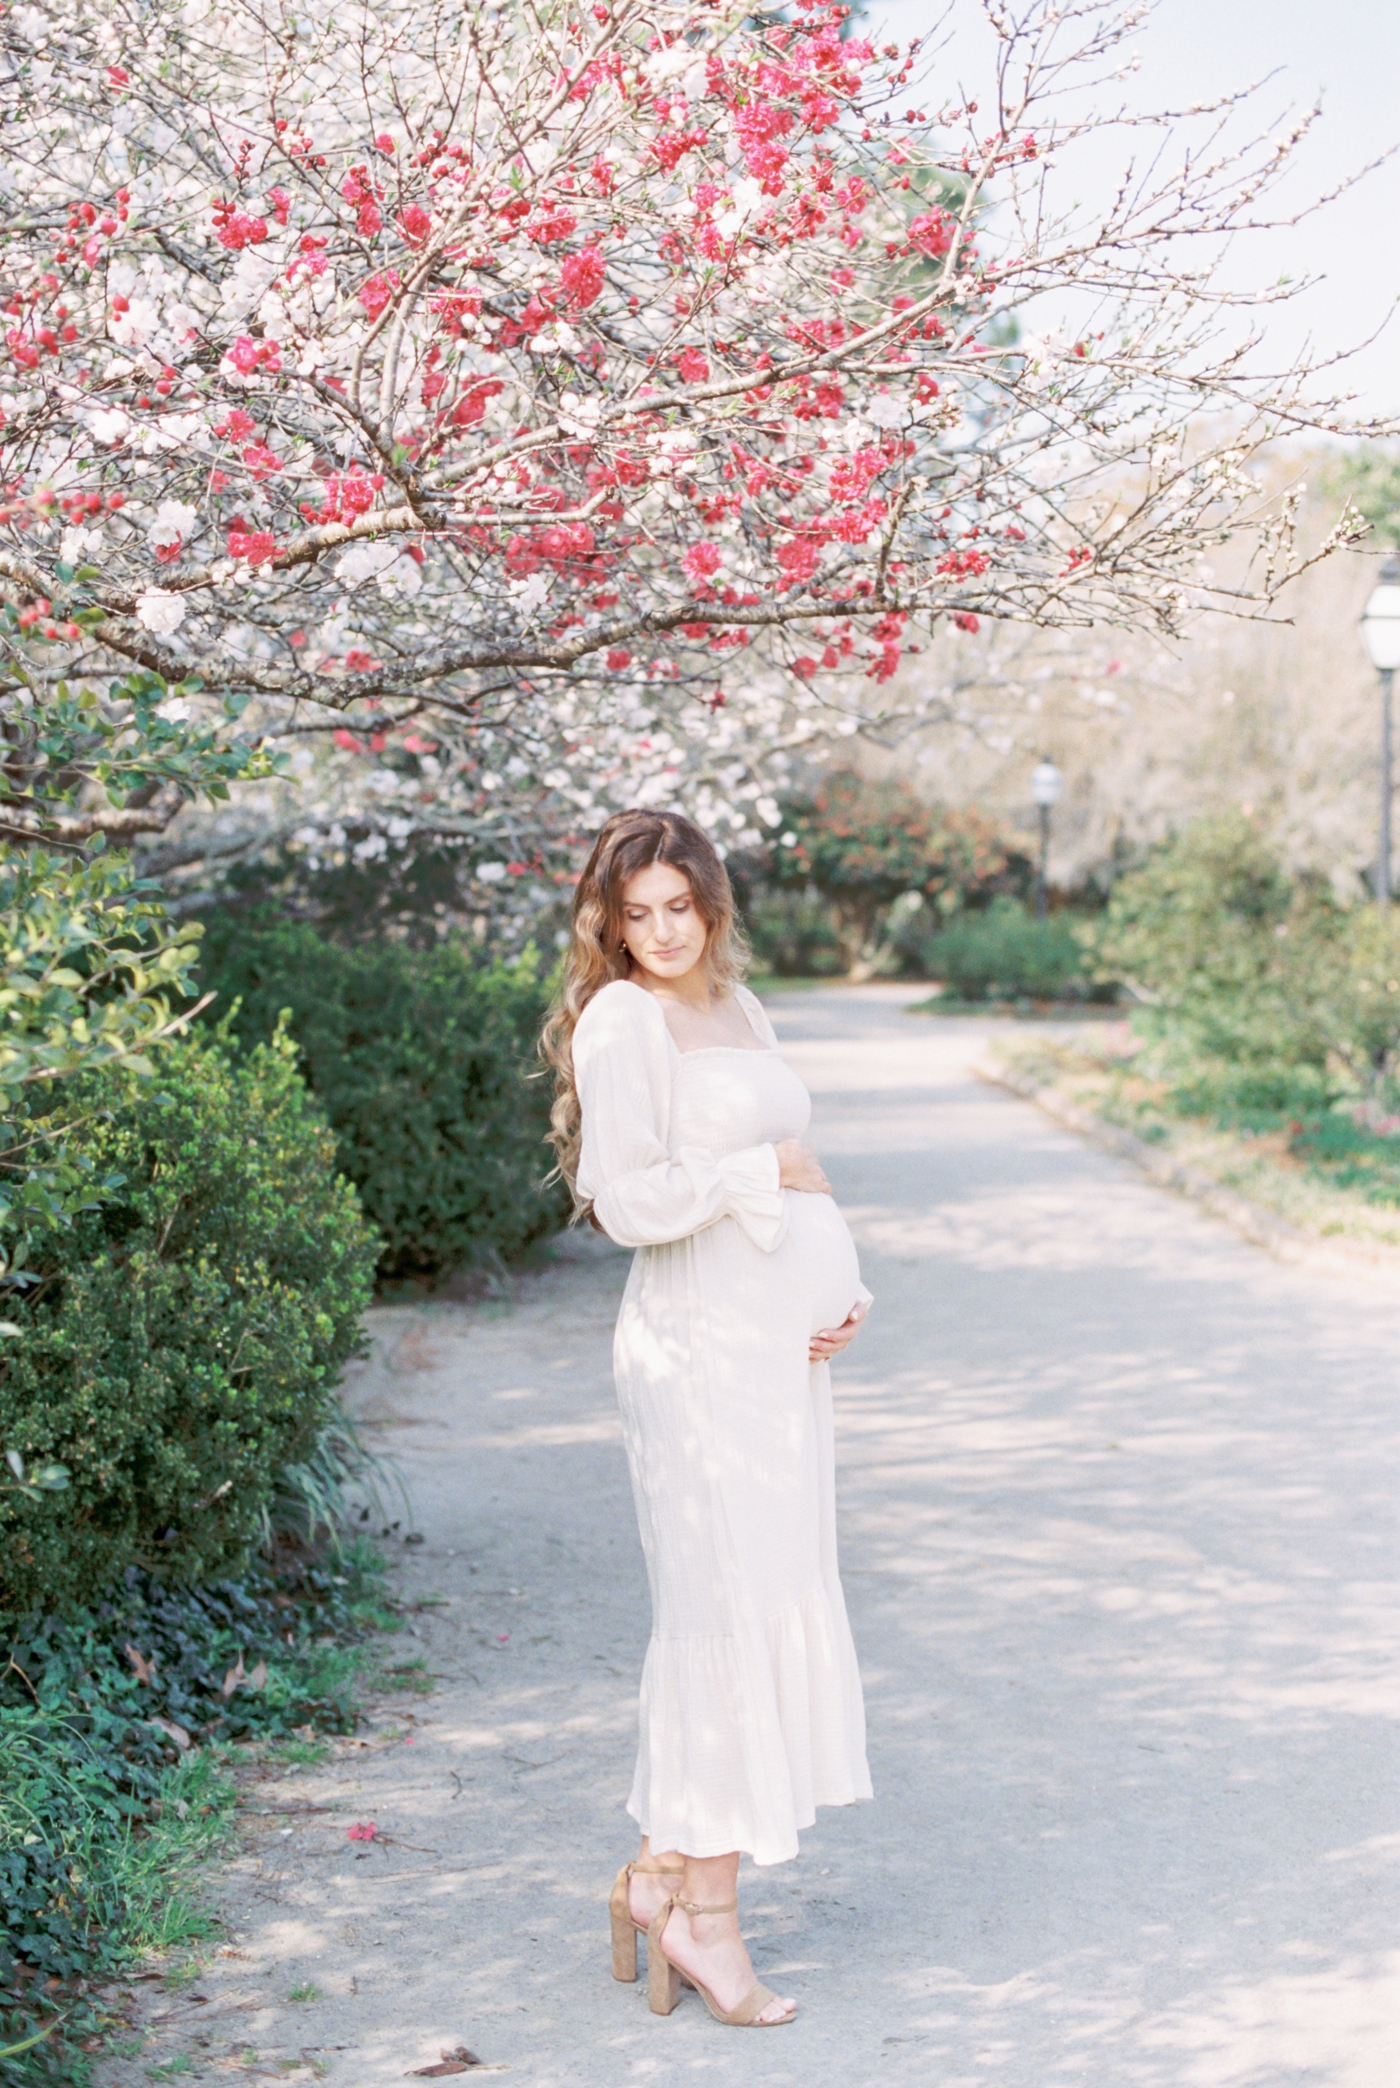 Pregnant woman photographed on Fuji400h film by fine art maternity photographer, Caitlyn Motycka Photography.